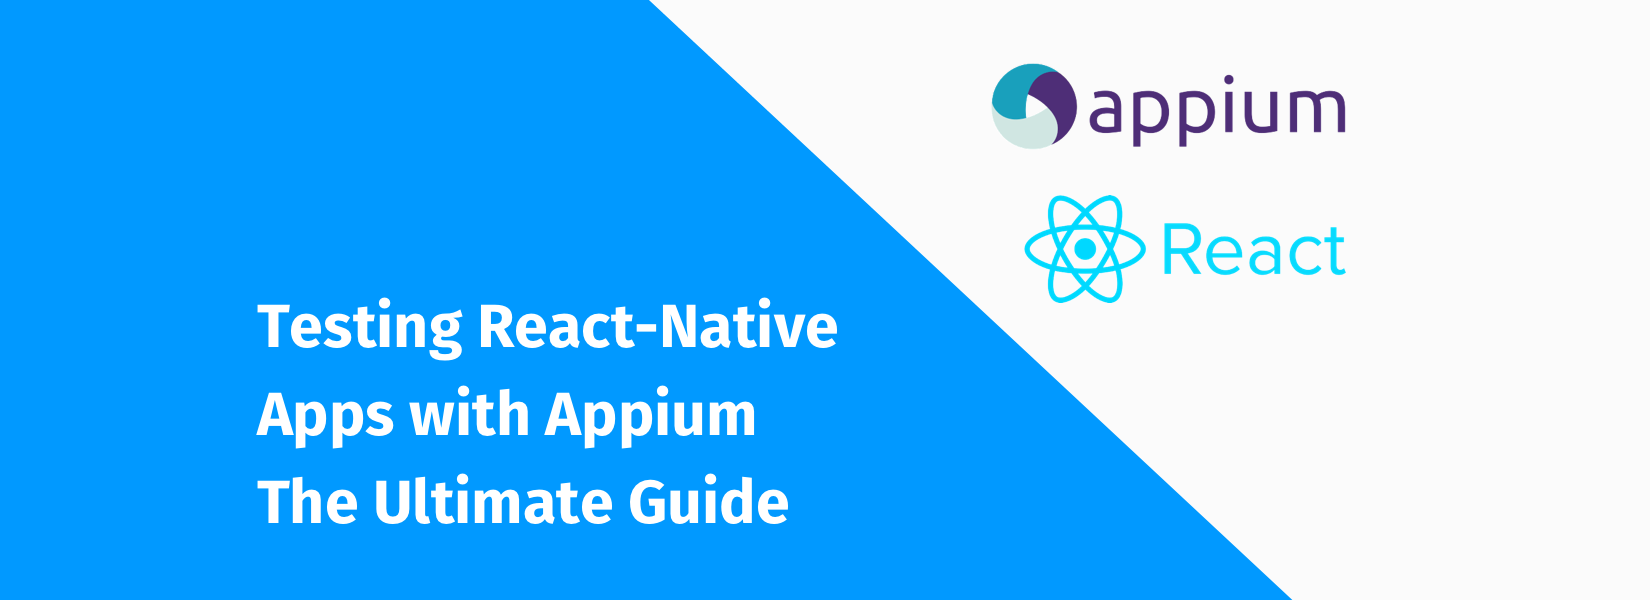 Testing React-Native Apps with Appium - The Ultimate Guide